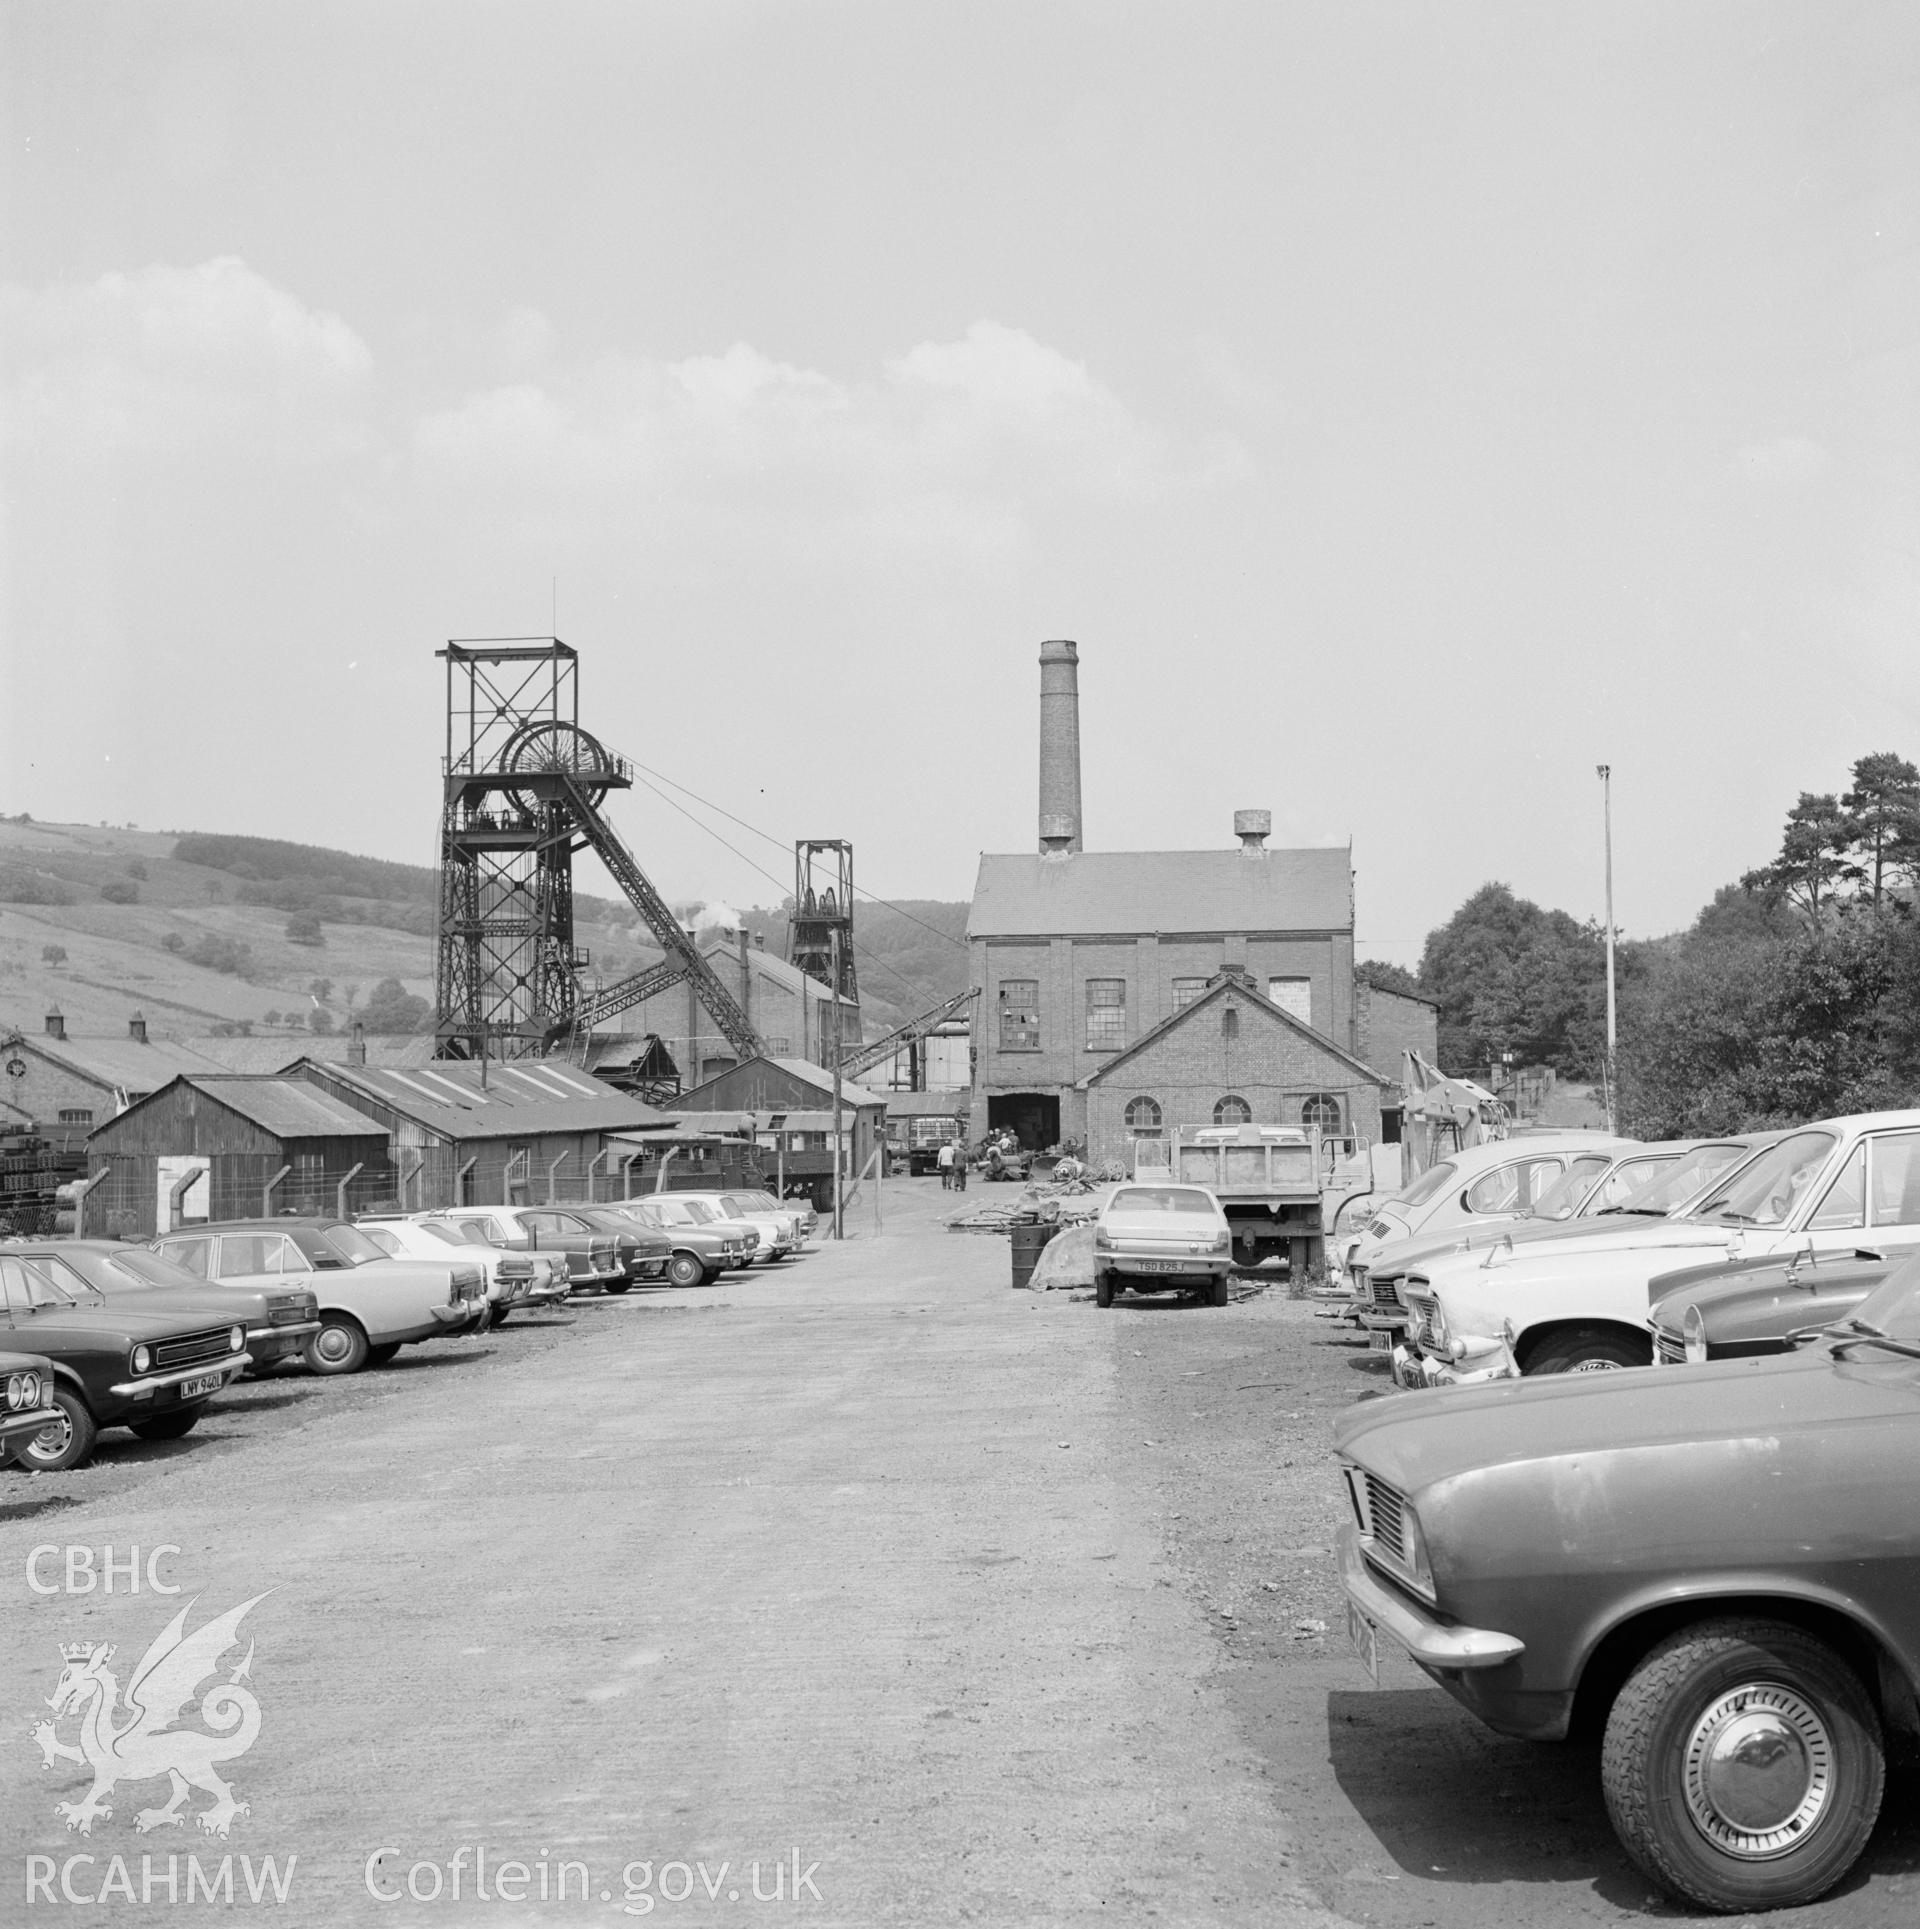 Digital copy of an acetate negative showing general view of Cefncoed Colliery, from the John Cornwell Collection.